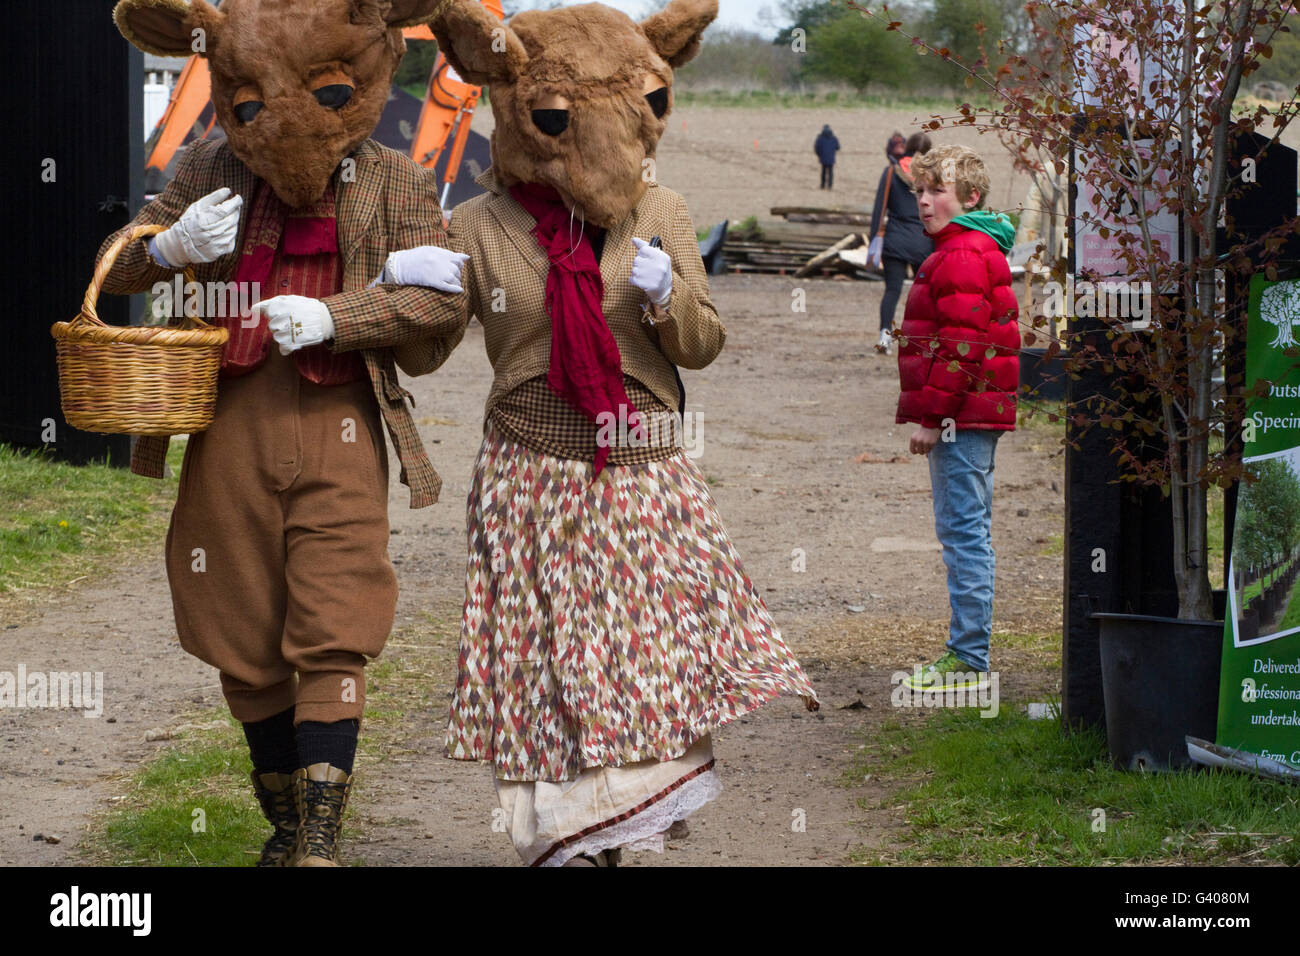 Boy doesn't know what to make of two actors in period mouse costumes at the Alde Valley Spring Festival Stock Photo